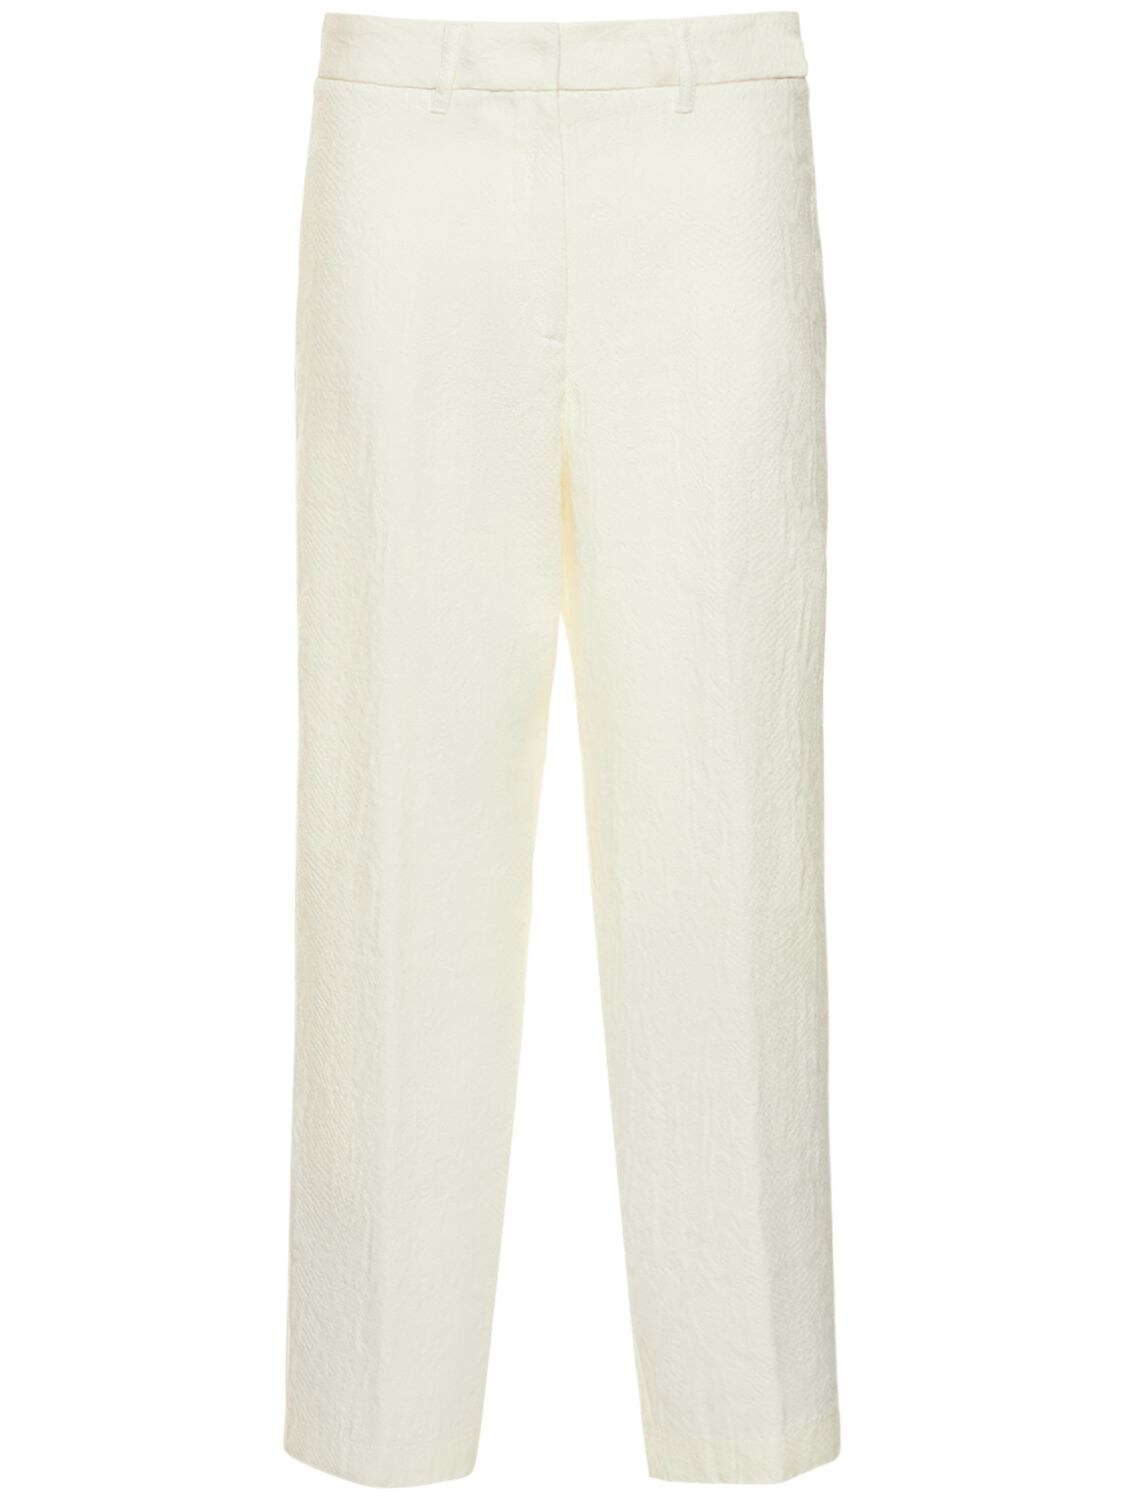 FORTE FORTE STRUCTURED LINEN CREPE JACQUARD trousers